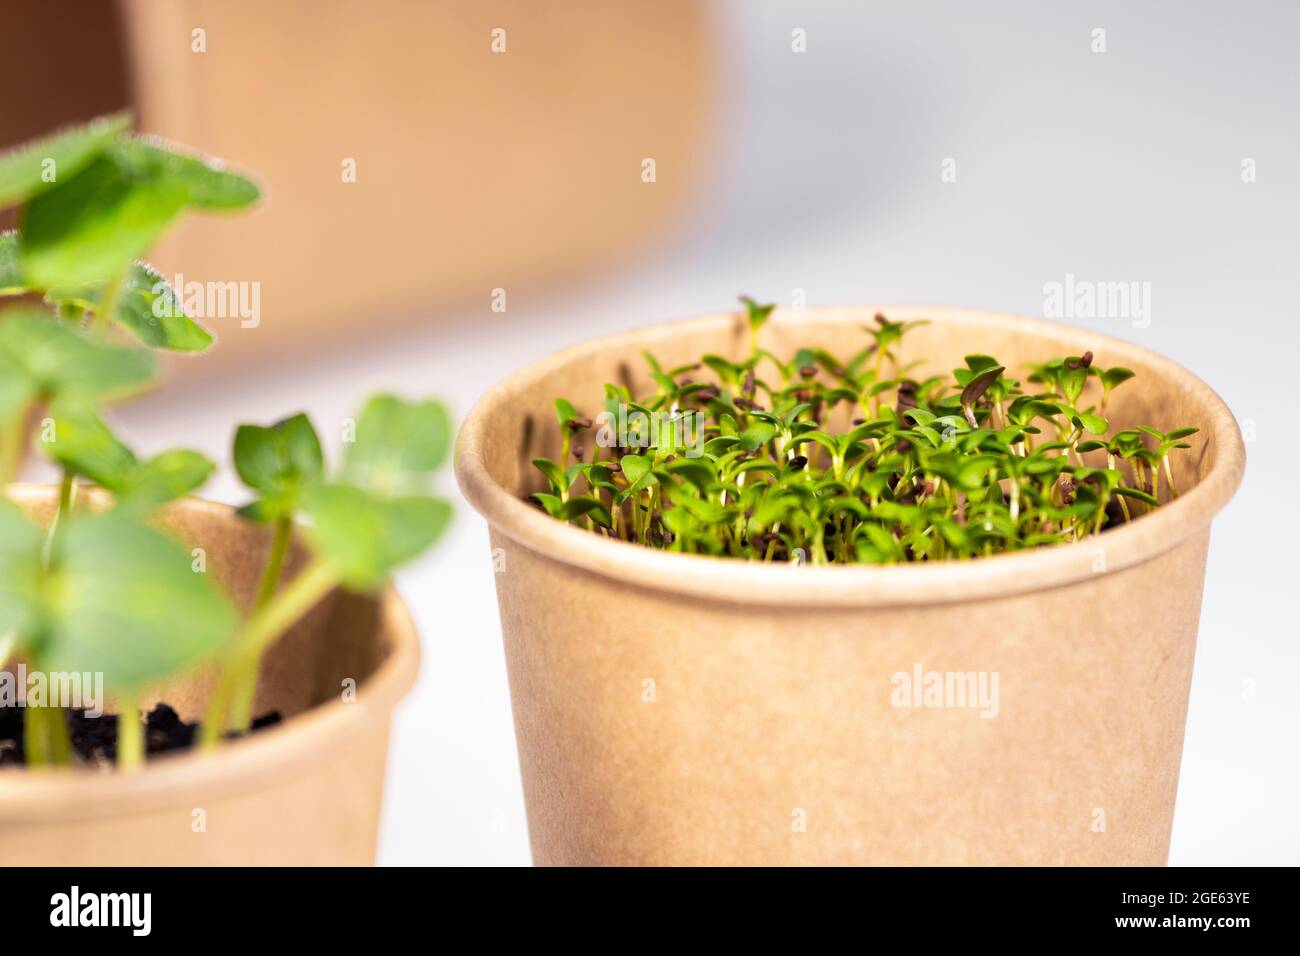 Microgreens closeup. Young green sprouts for food in paper cup. Diet food.  Herbal growing. Healthy eating concept in light background. Eco Friendly Th  Stock Photo - Alamy